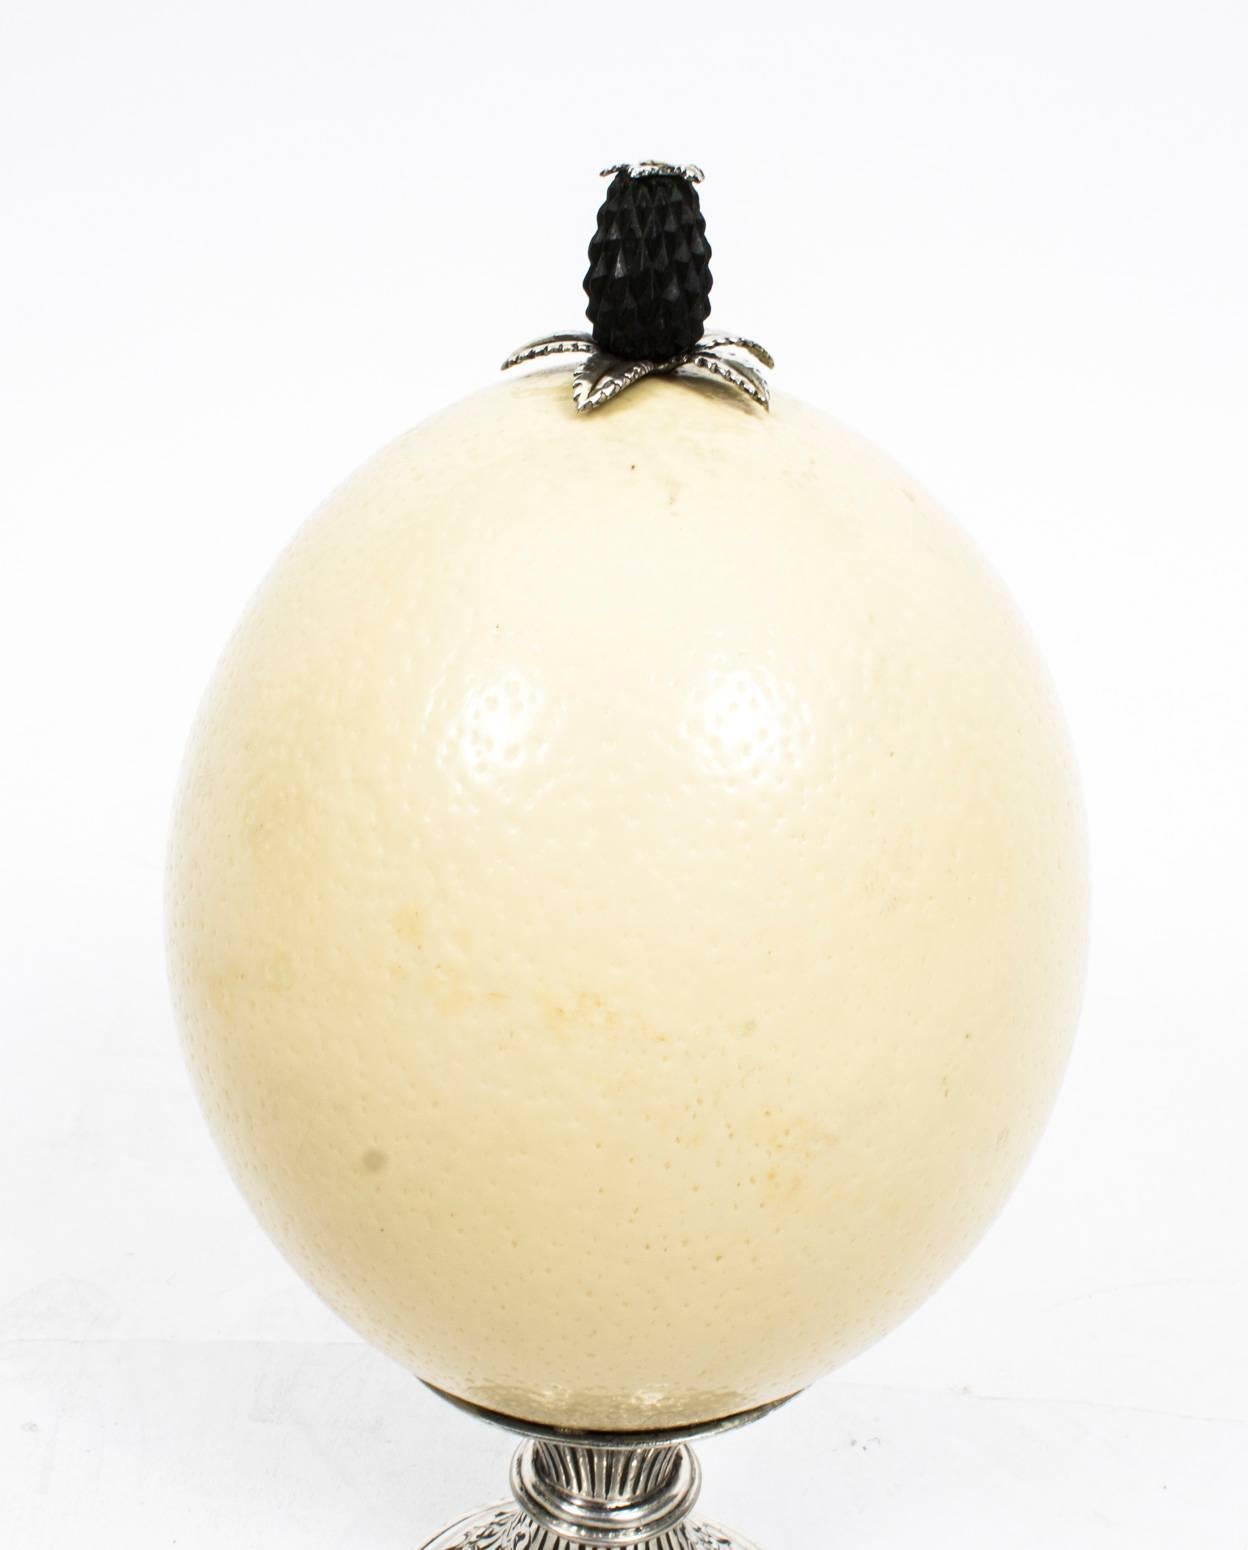 This is a wonderful antique English Victorian sterling silver mounted Ostrich egg with hallmarks for 1887 and the makers mark of the renowned silversmiths George Unite.

This beautiful polished ostrich egg is topped with an ebony pineapple finial